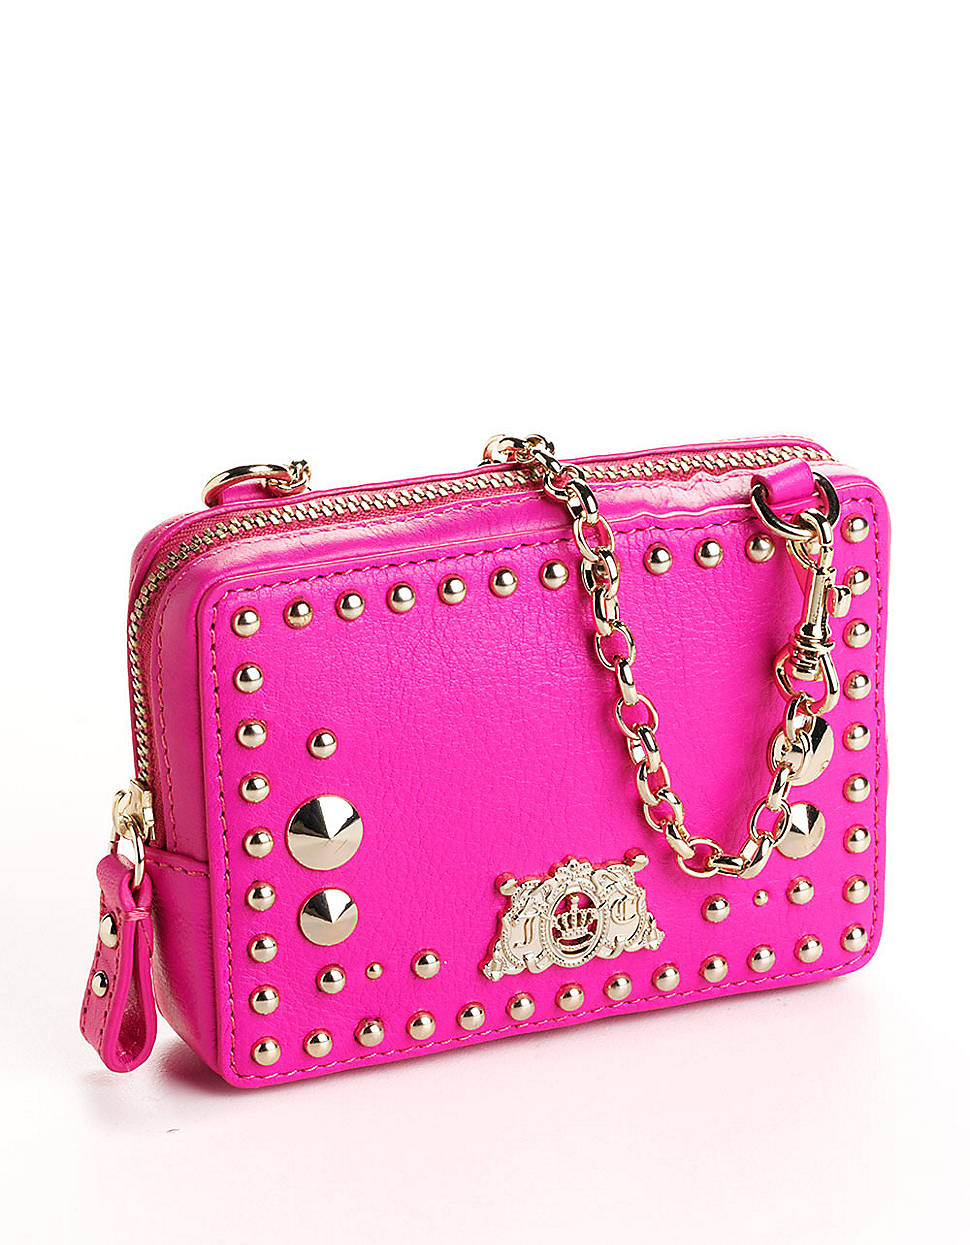 Juicy Couture Tough Girl Studded Leather Wristlet in Pink (pink cerise ...